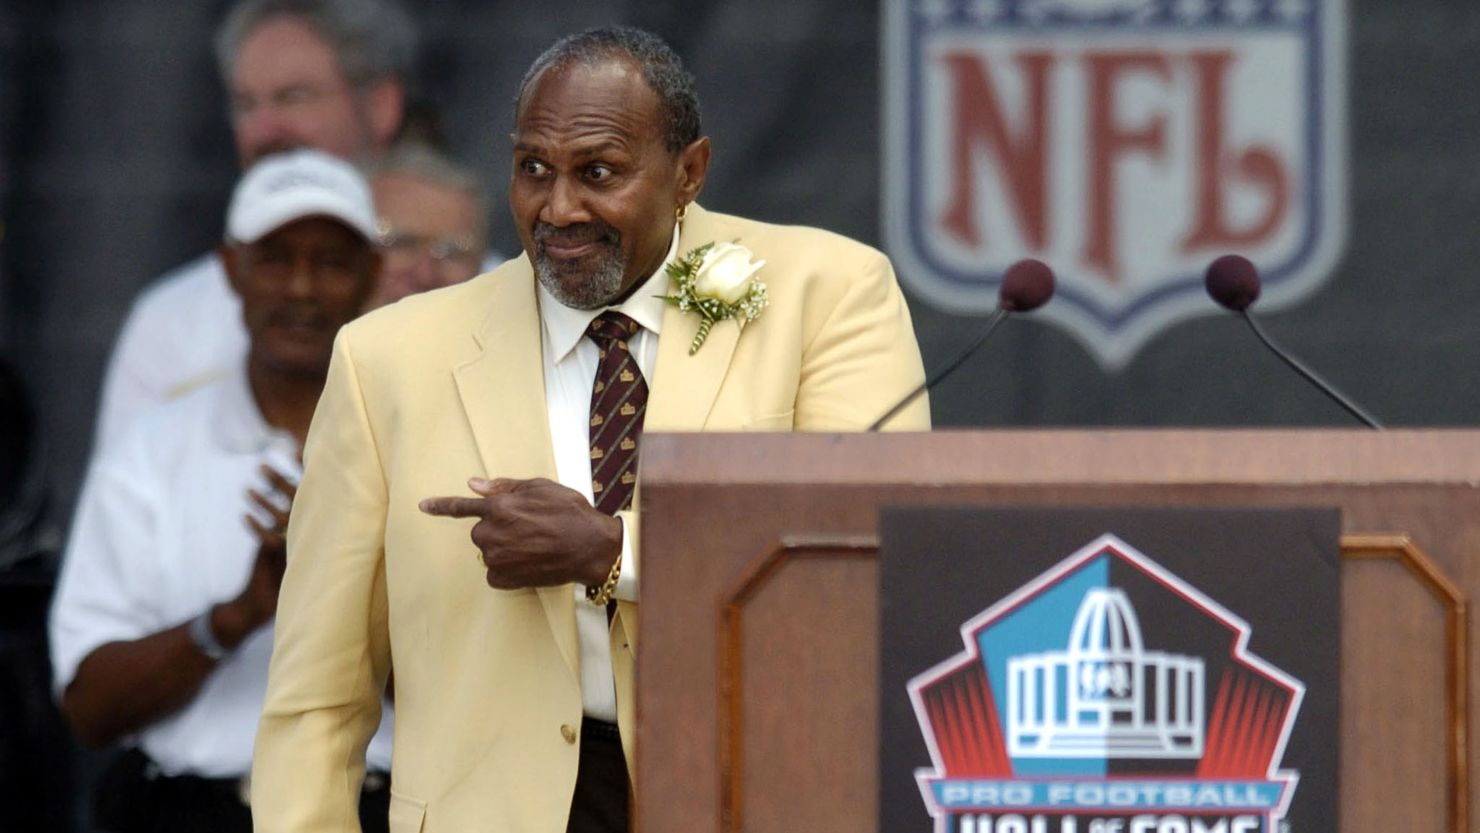 Pro Football Hall of Fame enshrinee Bob Brown gestures as he approaches the podium during an NFL Hall of Fame enshrinement ceremony in Canton, Ohio, on August 8, 2004. 